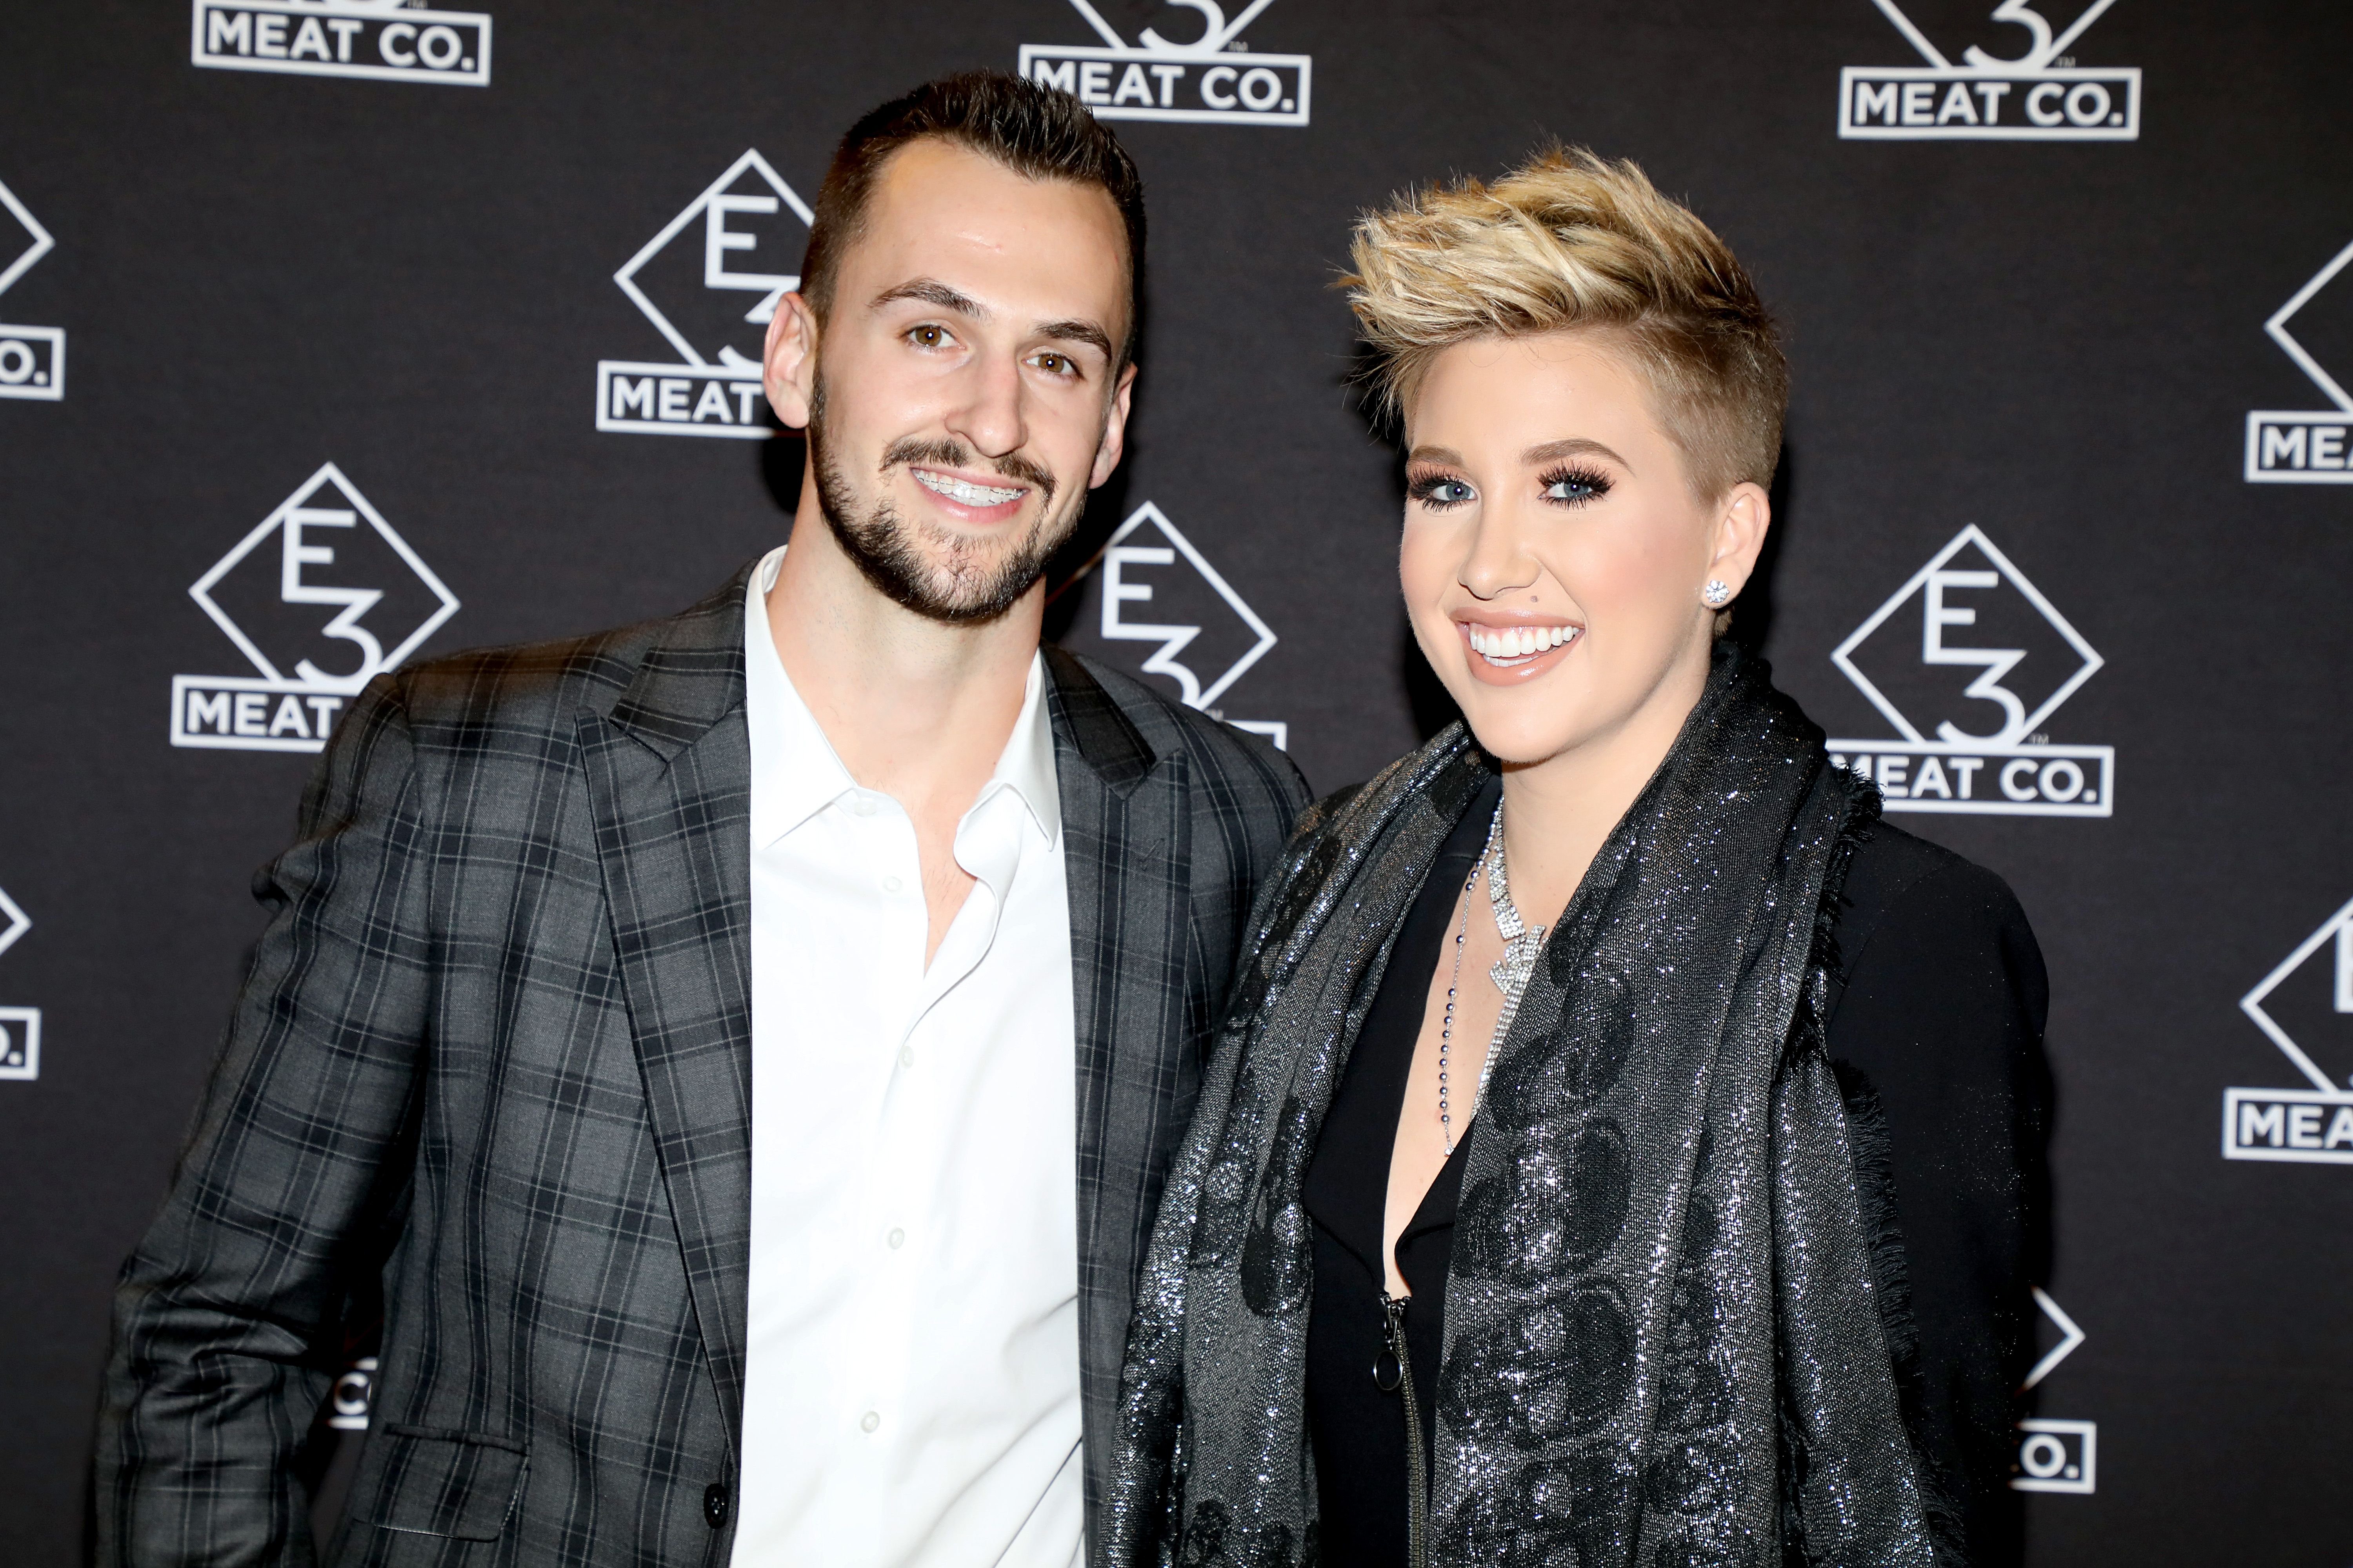 Nic Kerdiles and Savannah Chrisley attend the grand opening of E3 Chophouse Nashville on November 20, 2019, in Nashville, Tennessee. | Source: Getty Images